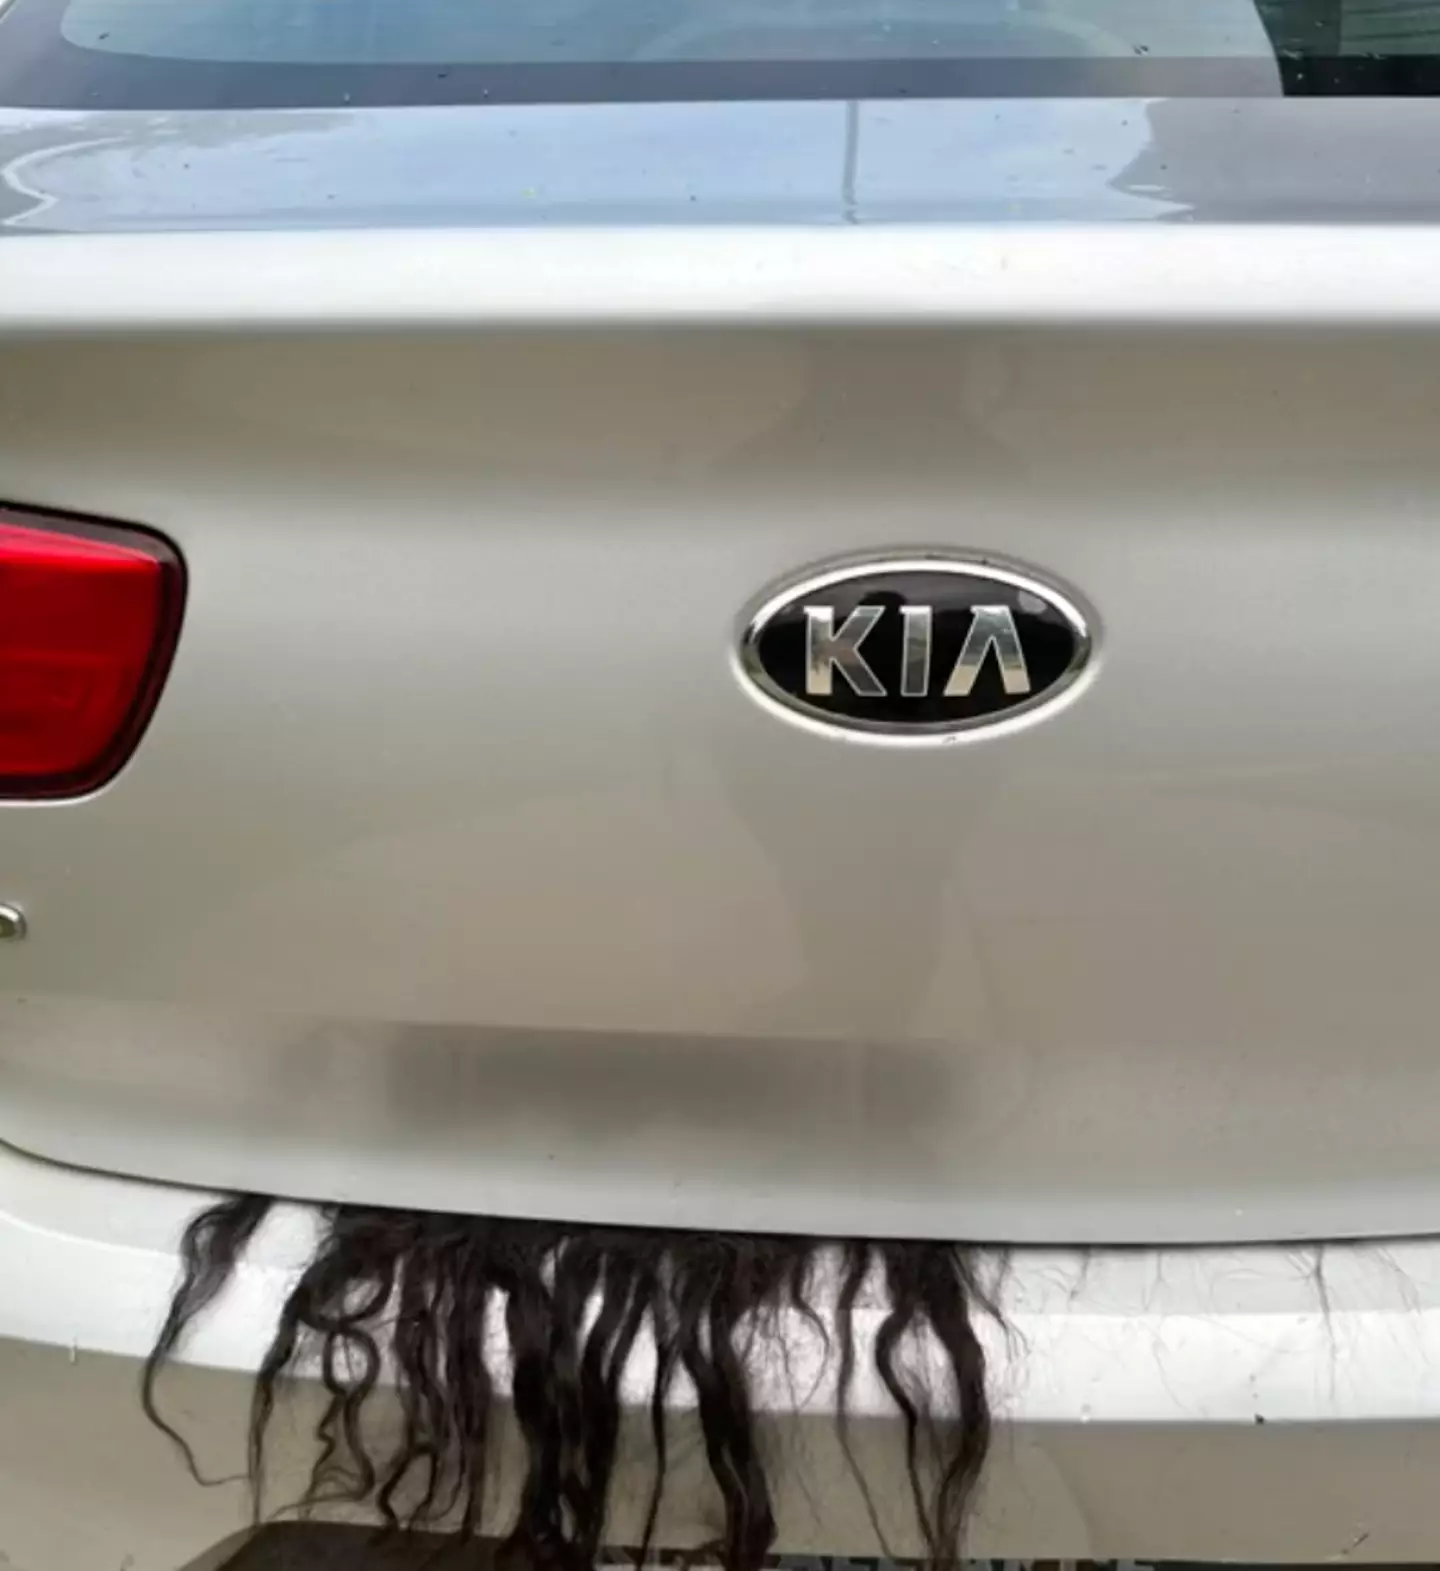 Toria's wig was hanging out the back of her car.